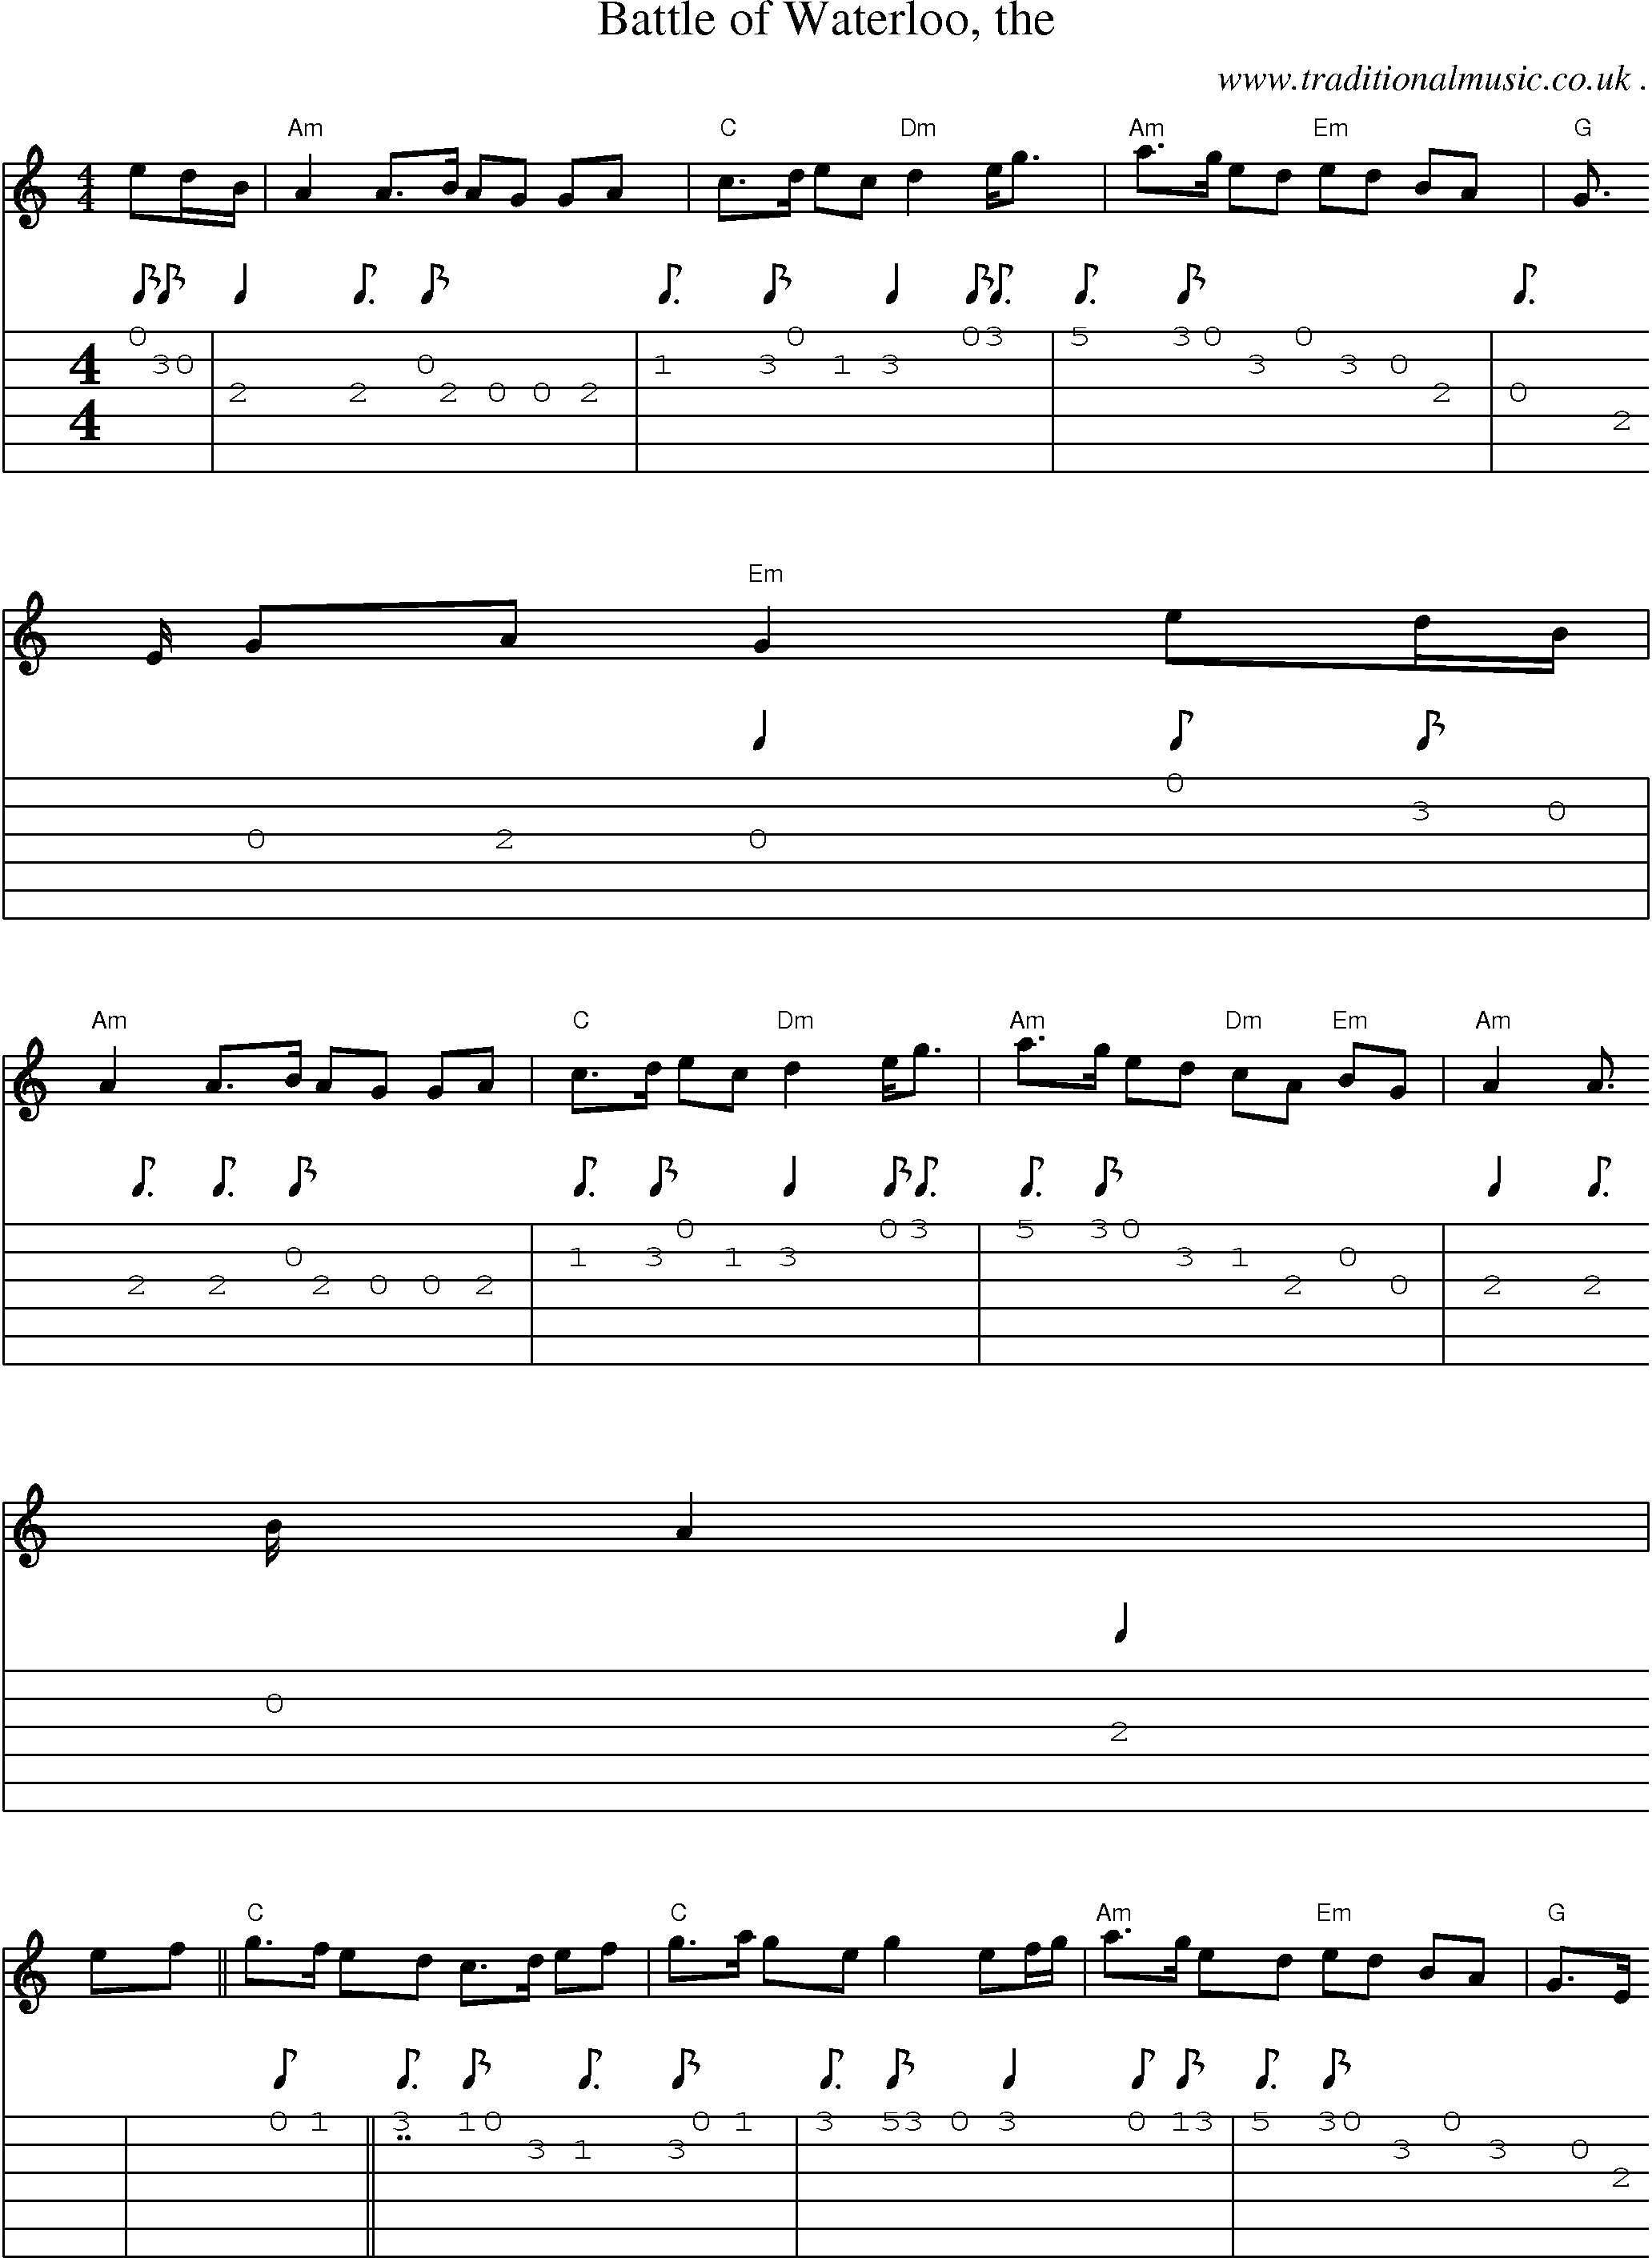 Sheet-music  score, Chords and Guitar Tabs for Battle Of Waterloo The